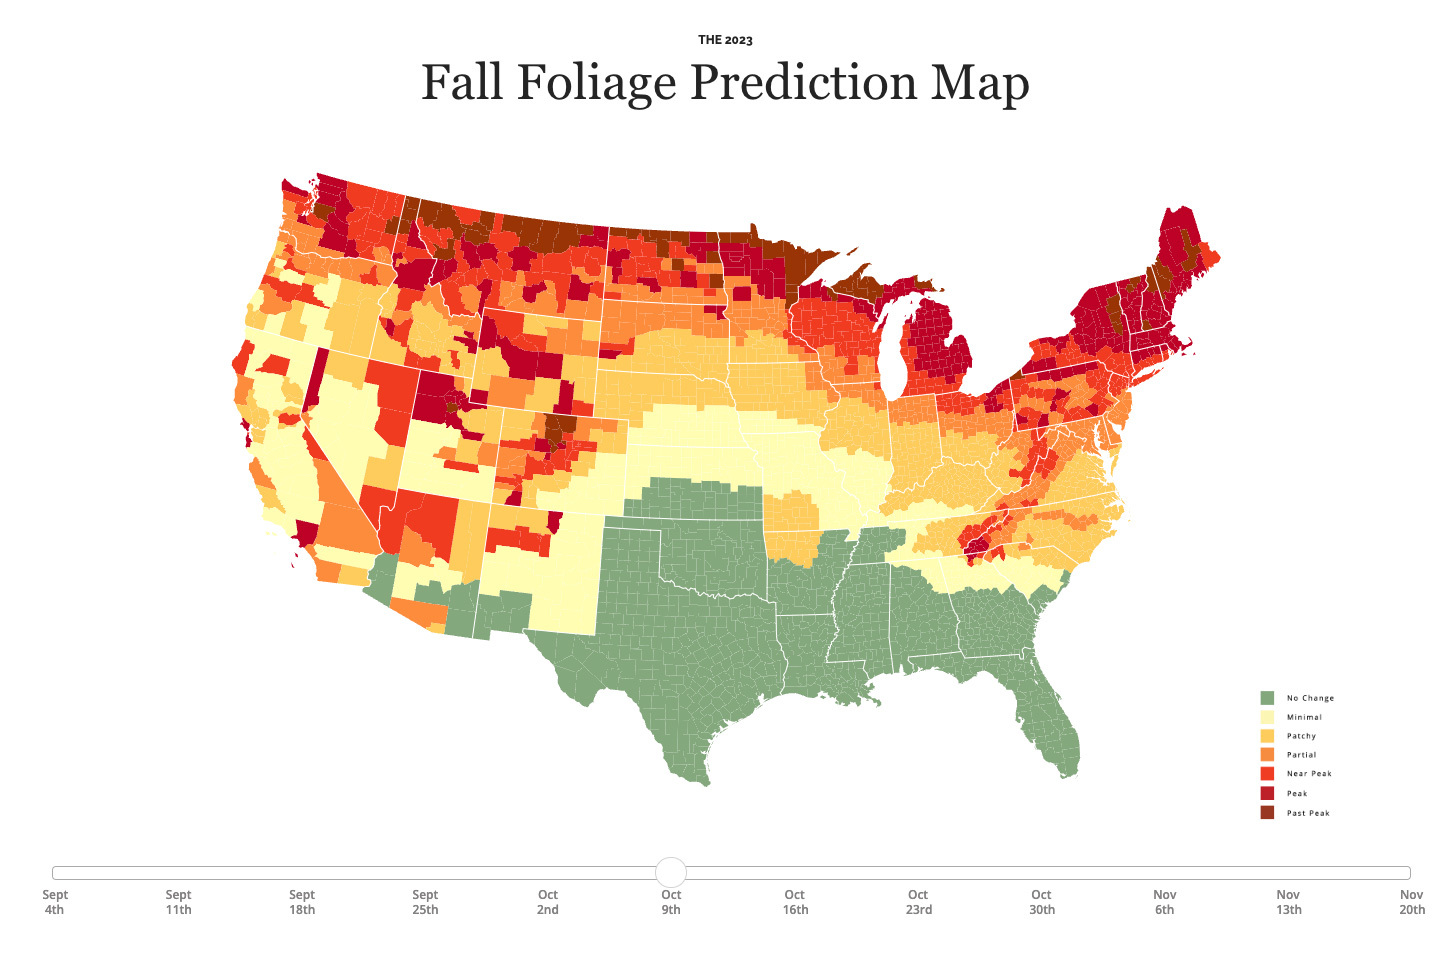 This fall foliage map predicts when Los Angeles will hit its colorful peak